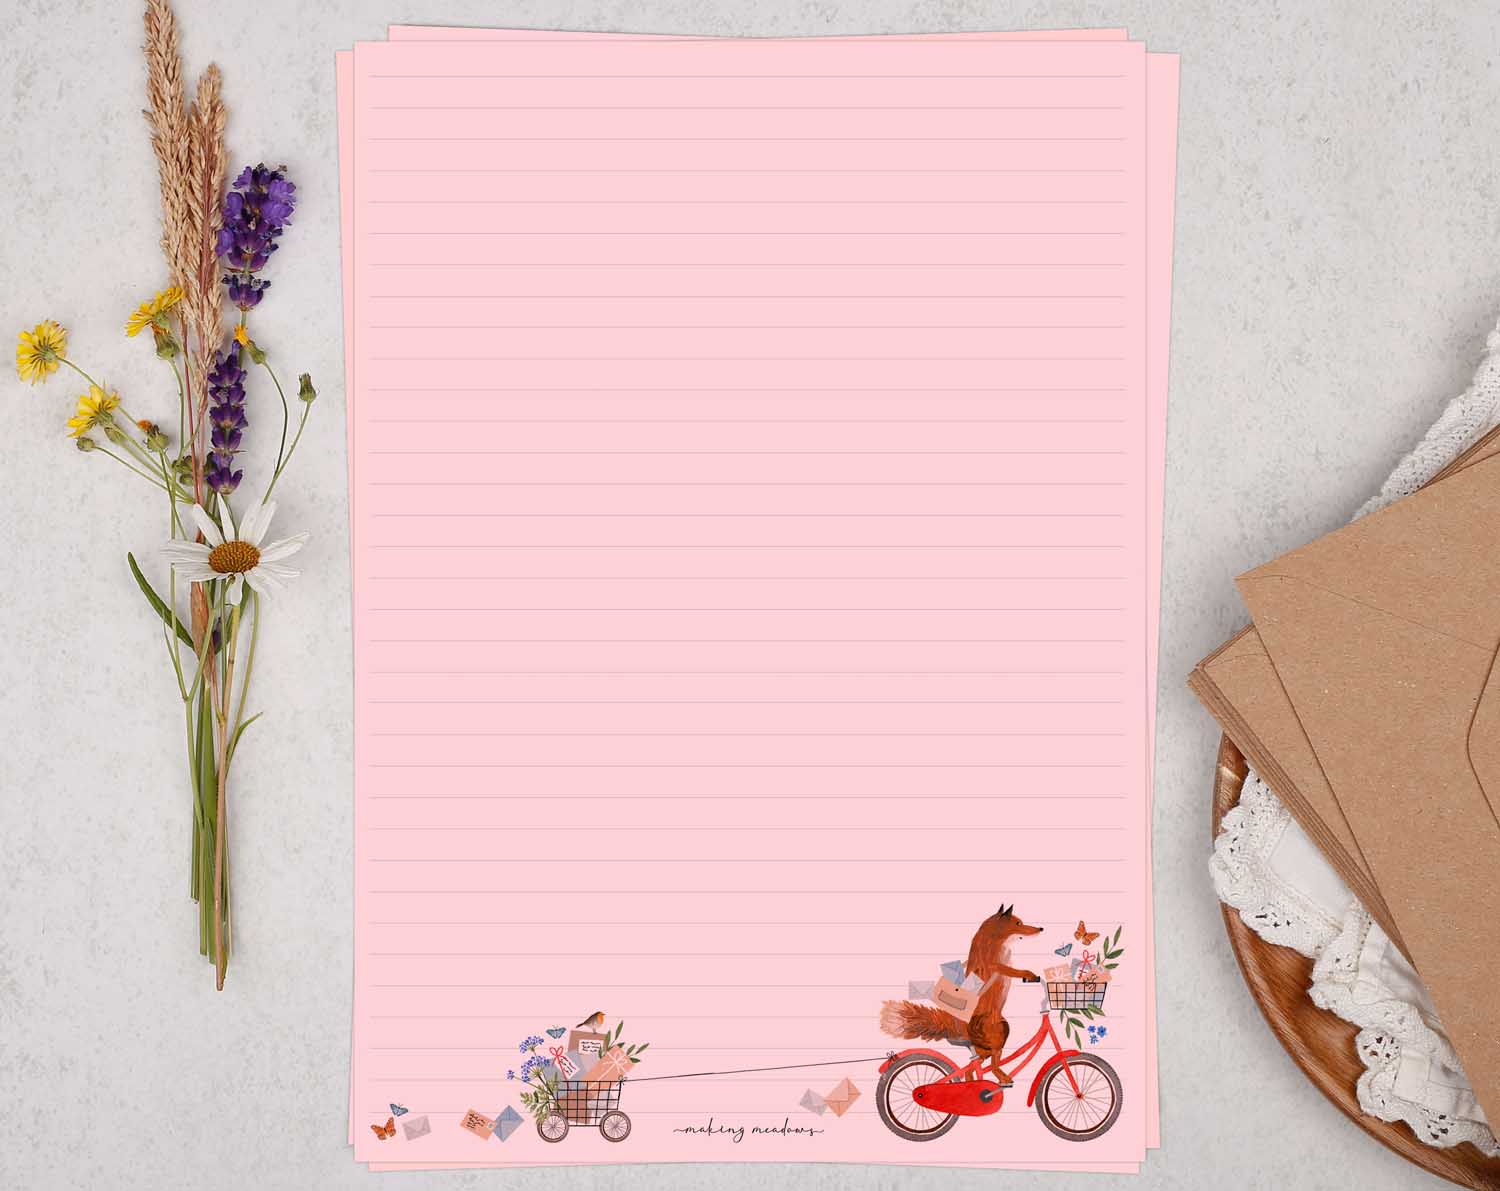 Pink A4 Letter Writing Paper Sheets with Fox On A Bike With Cute Robin watercolour border design.